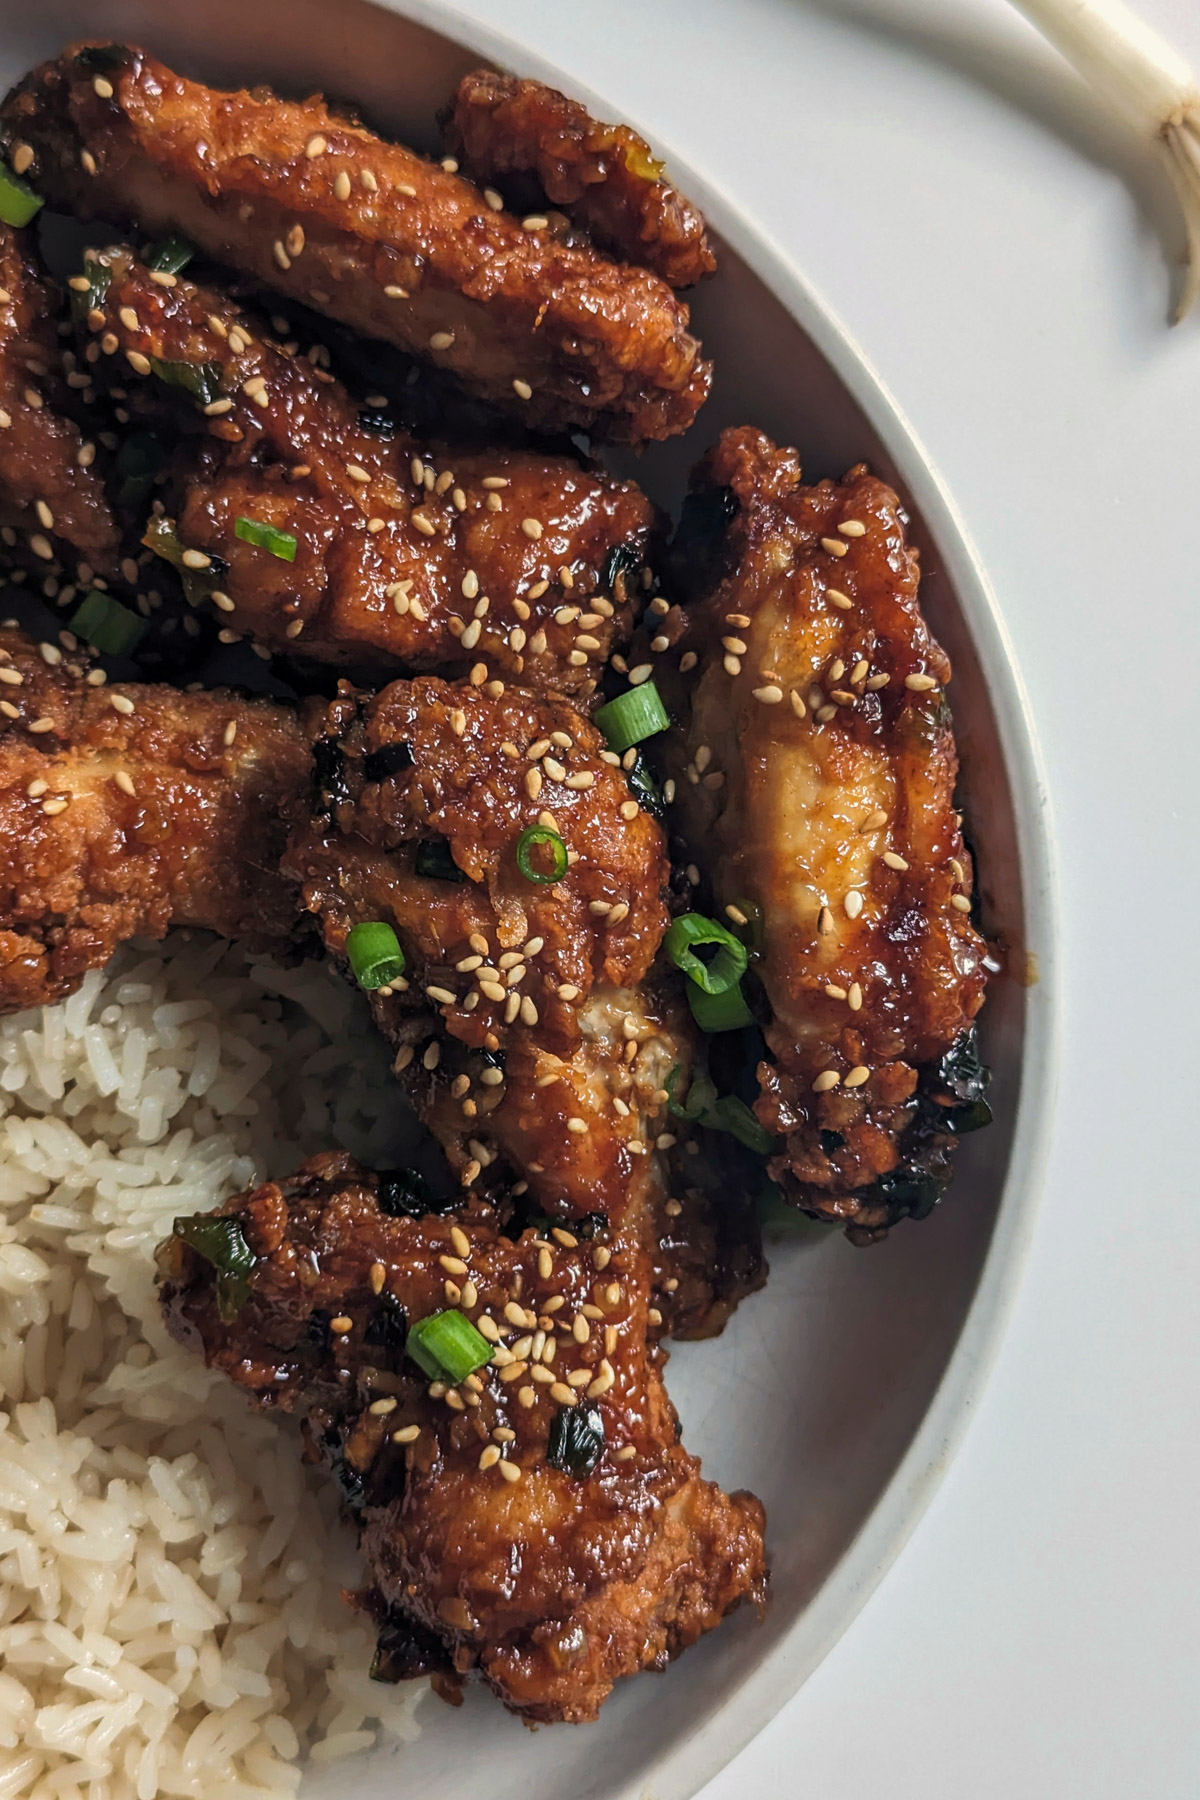 Soy garlic chicken wings in a serving bowl.